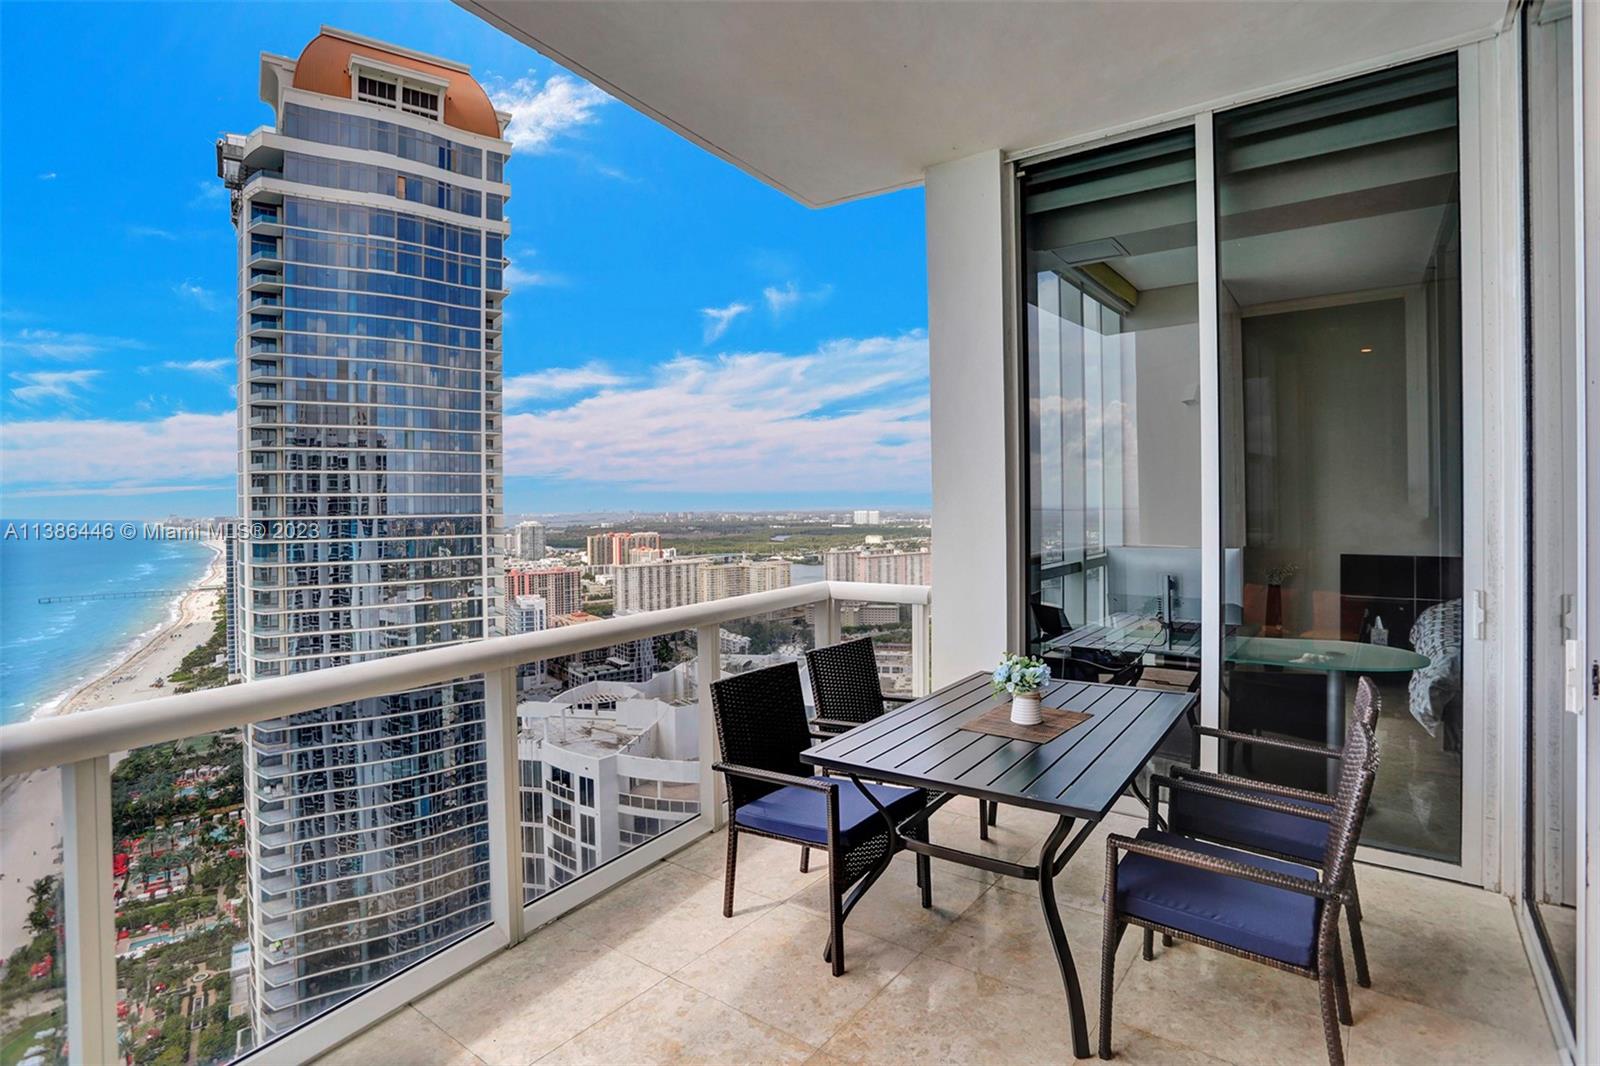 Photo 2 of Trump Palace and Royale Palace Apt 5104 in Sunny Isles Beach - MLS A11386446